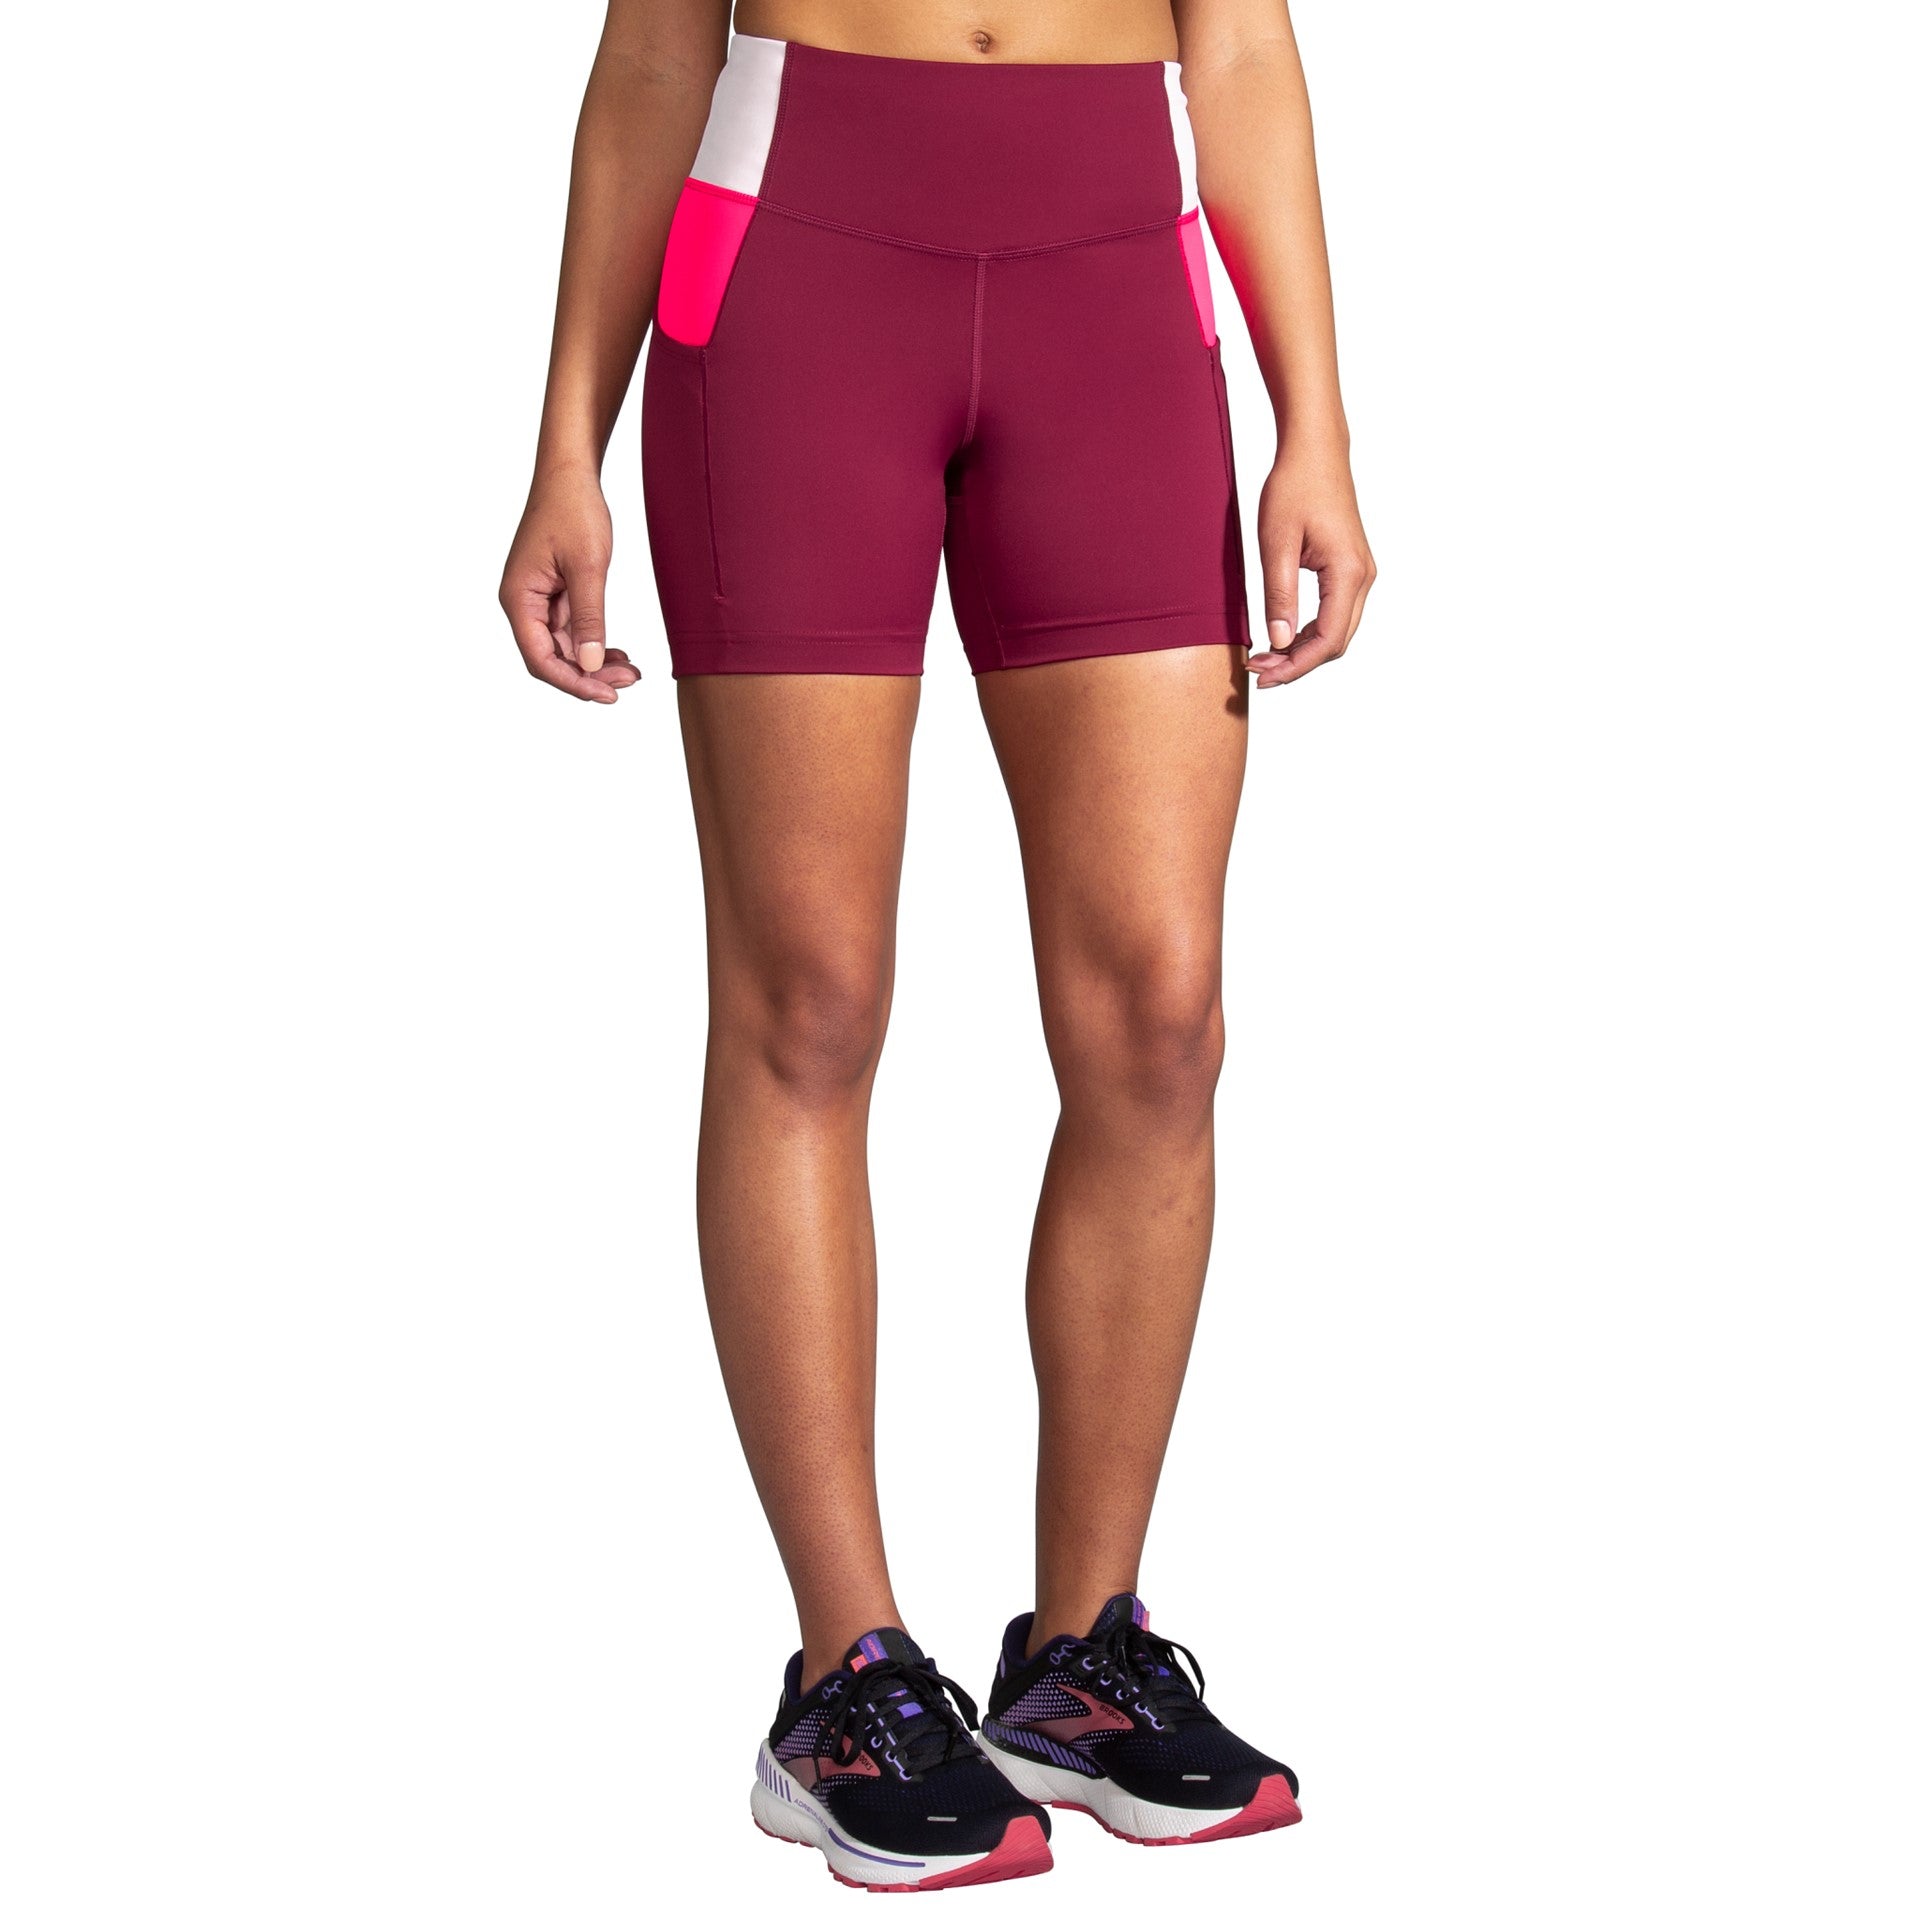 WOMEN'S METHOD 3/4 TIGHT - CLEARANCE